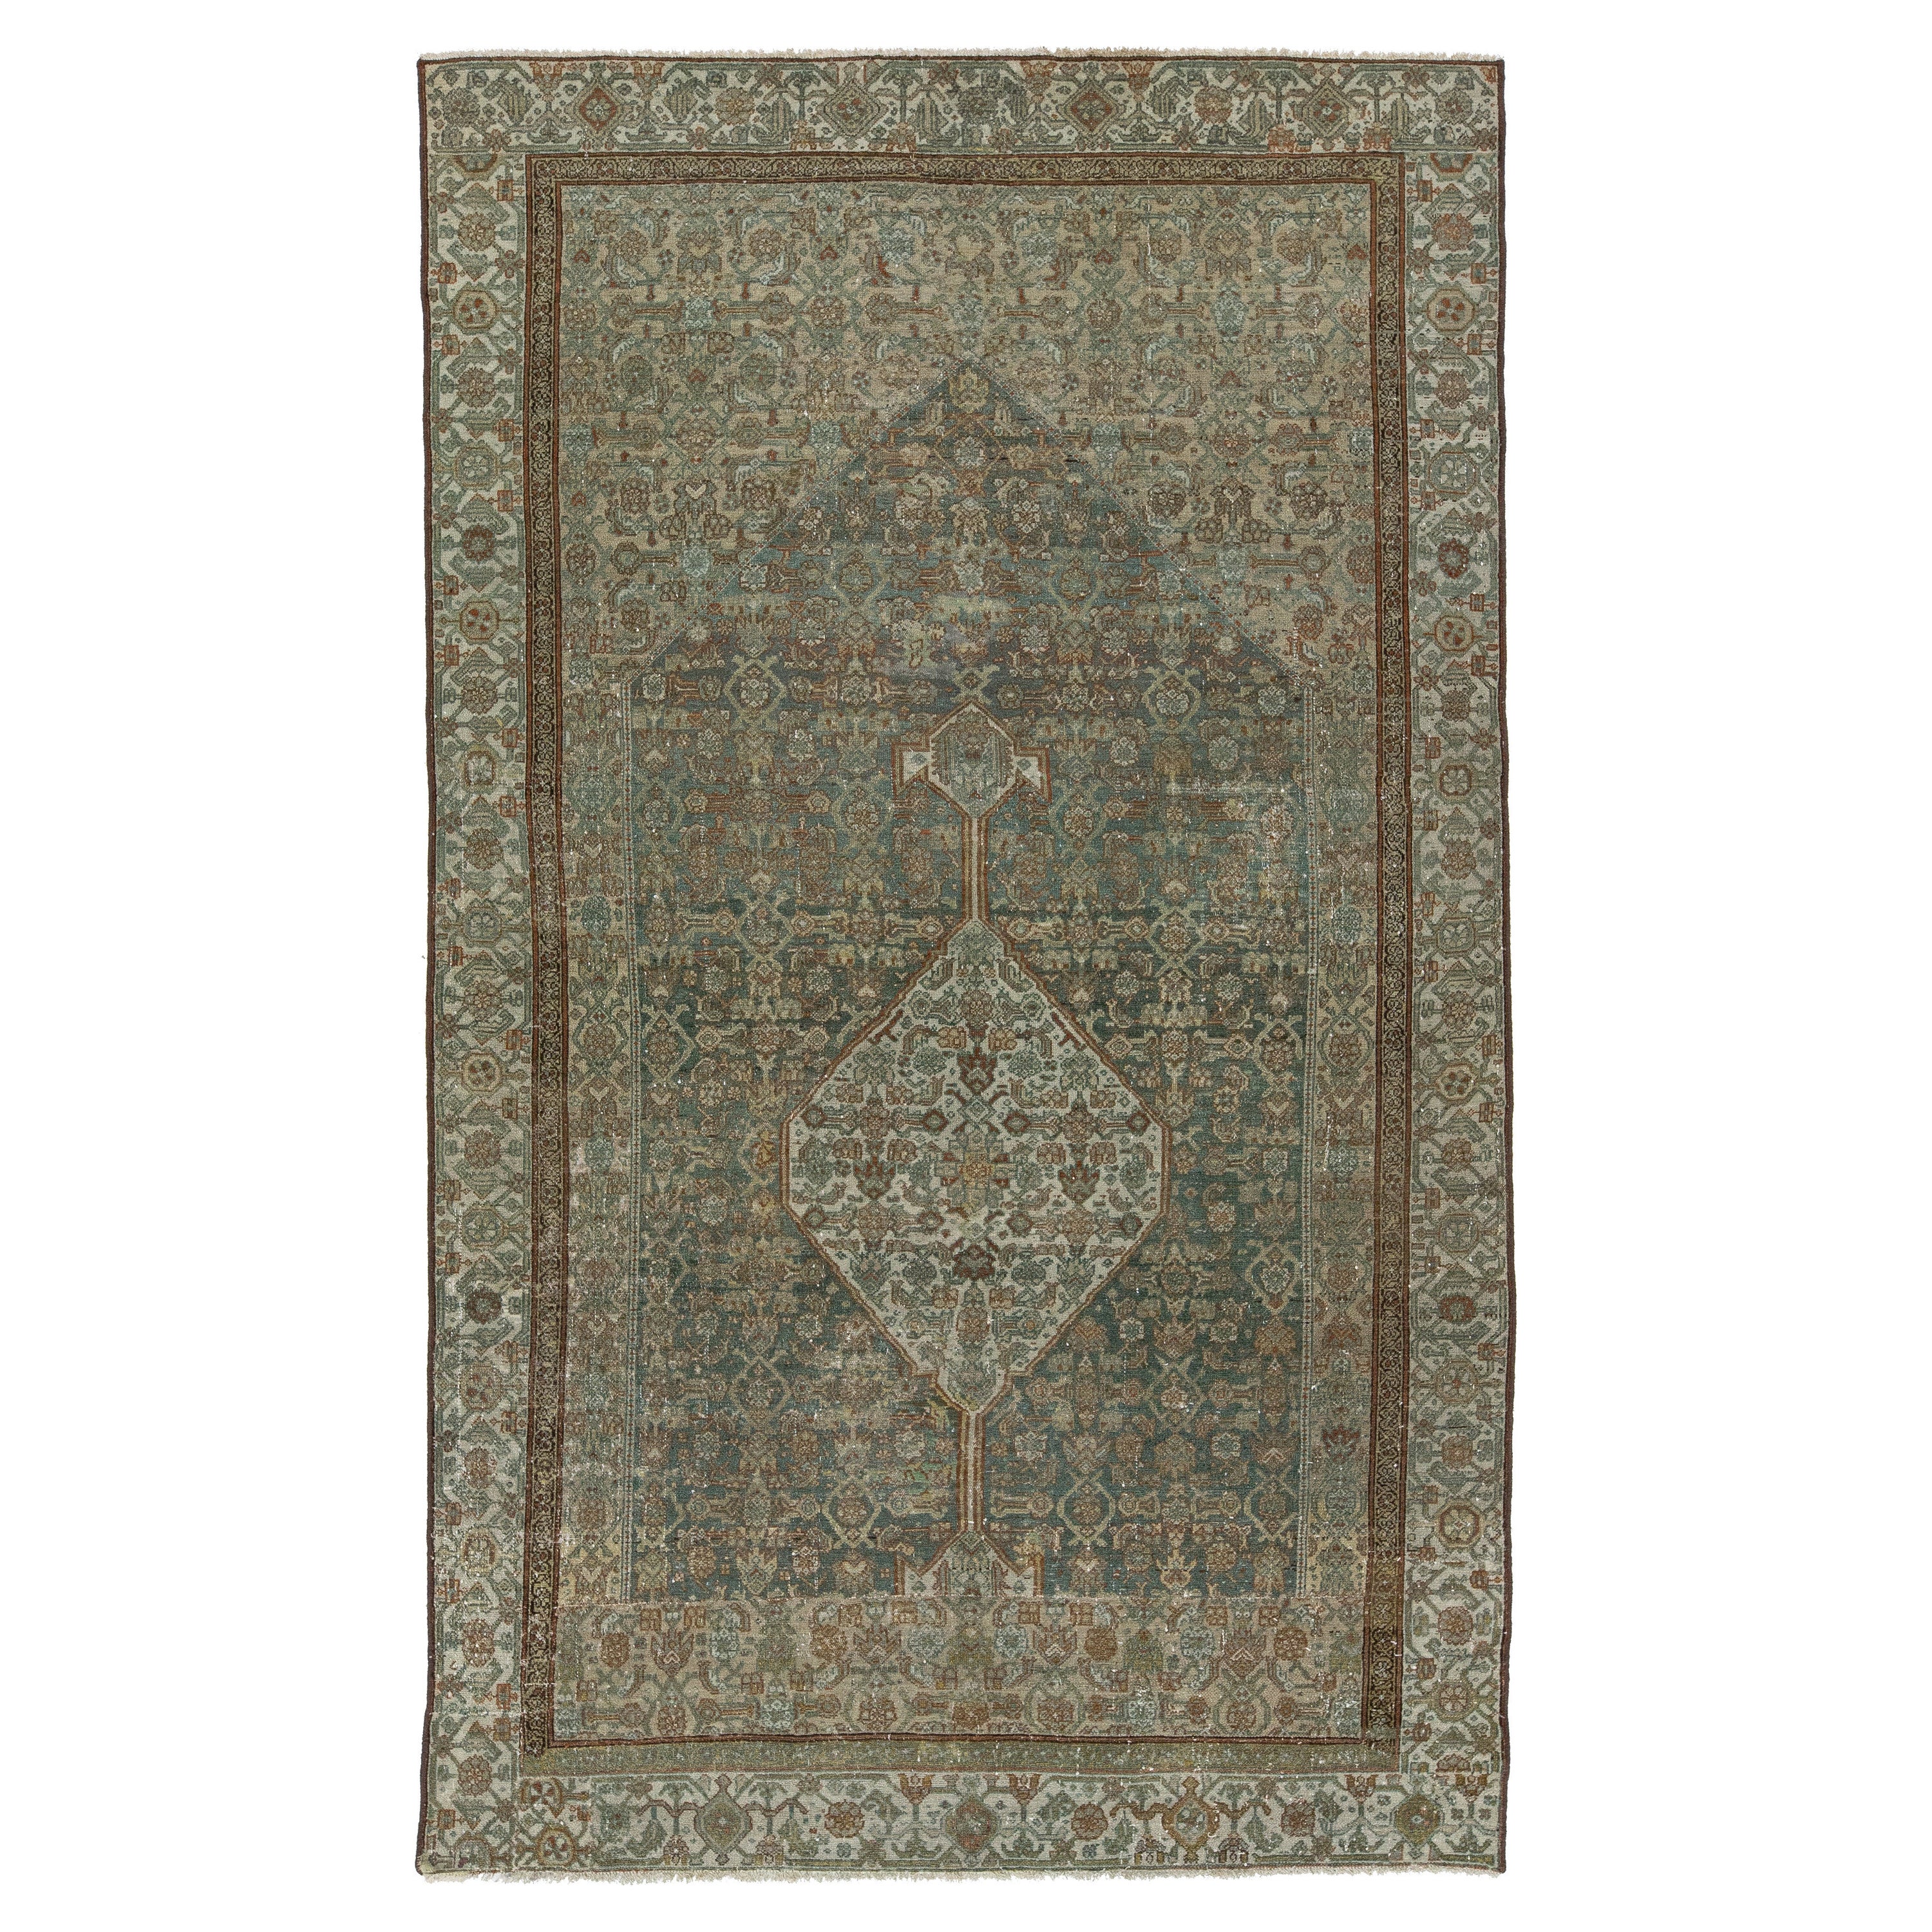 Antique Bibikabad Blue Handmade Persian Wool Rug with Allover Floral Pattern For Sale